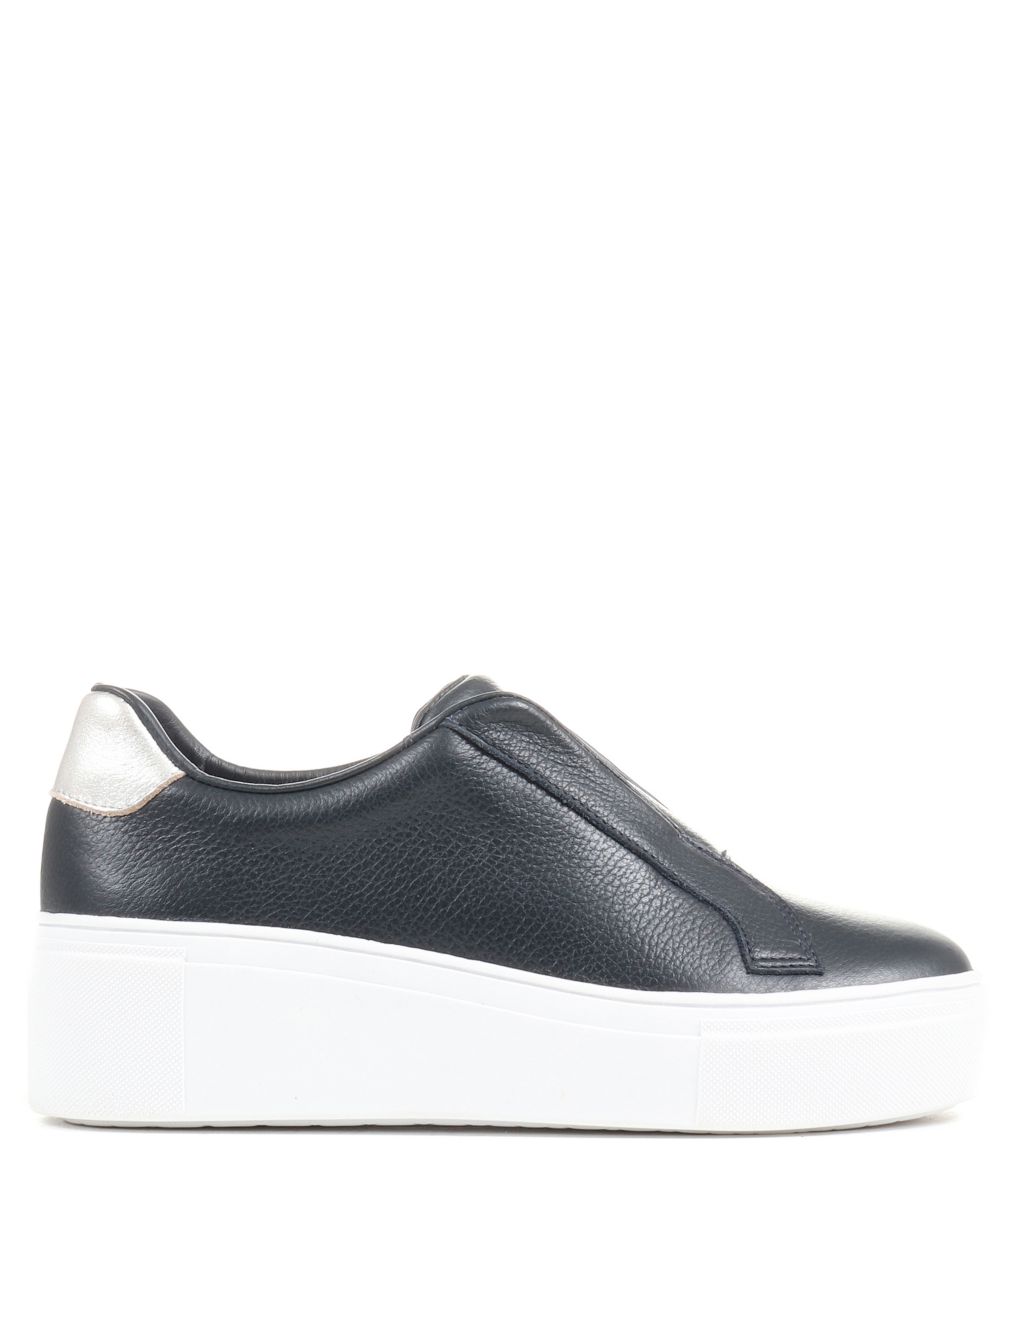 Leather Slip On Trainers image 4